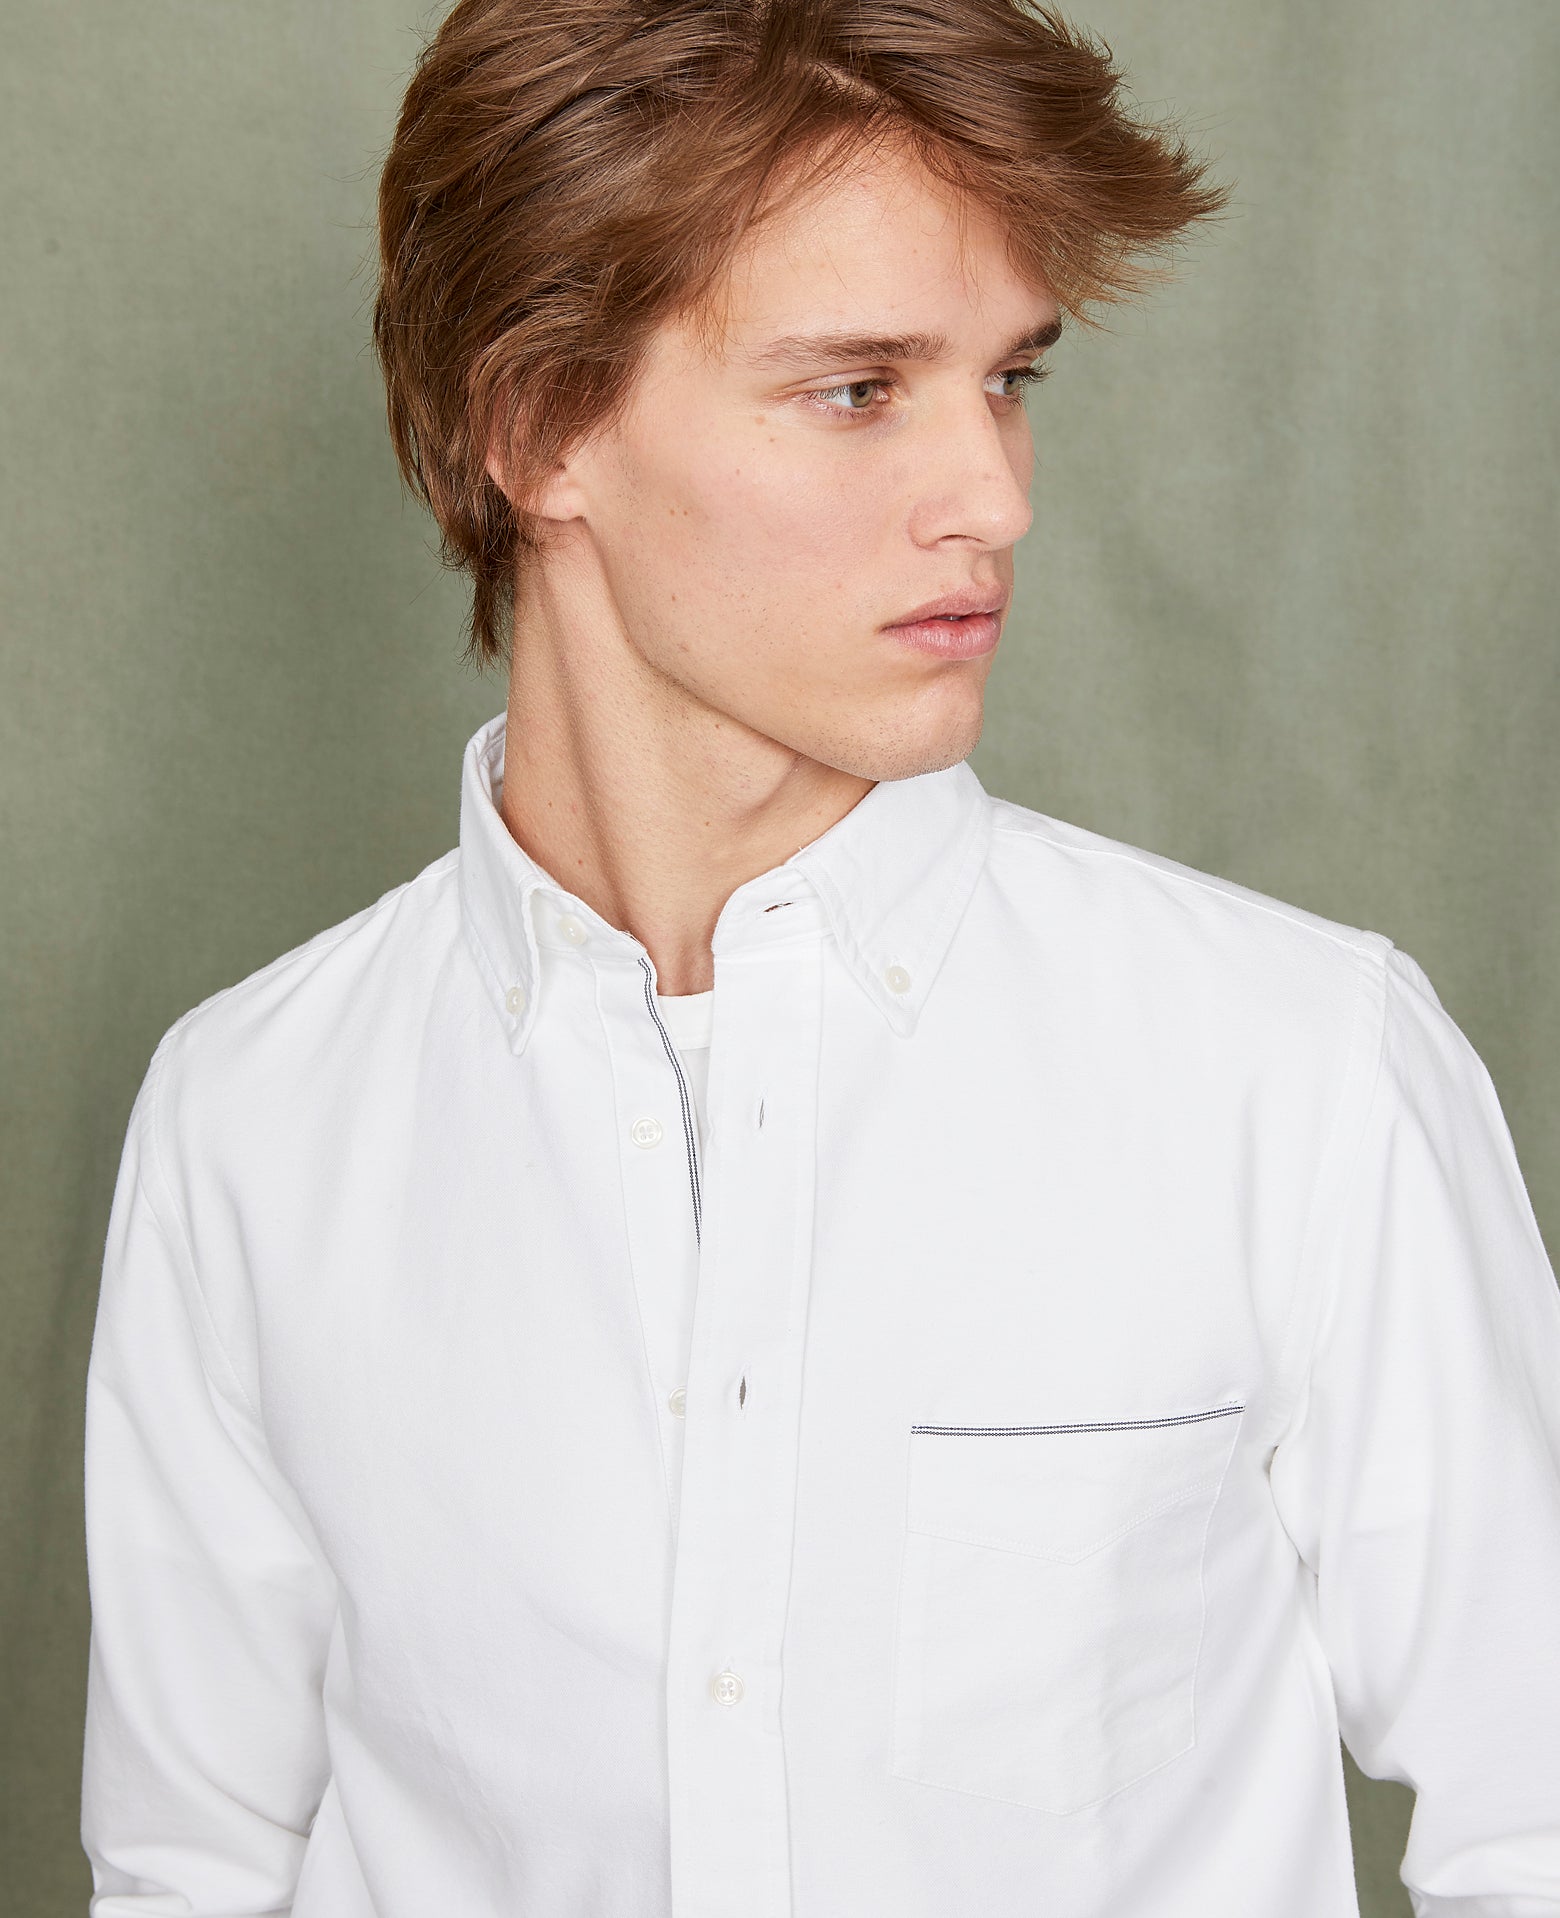 New button down shirt - Image 7